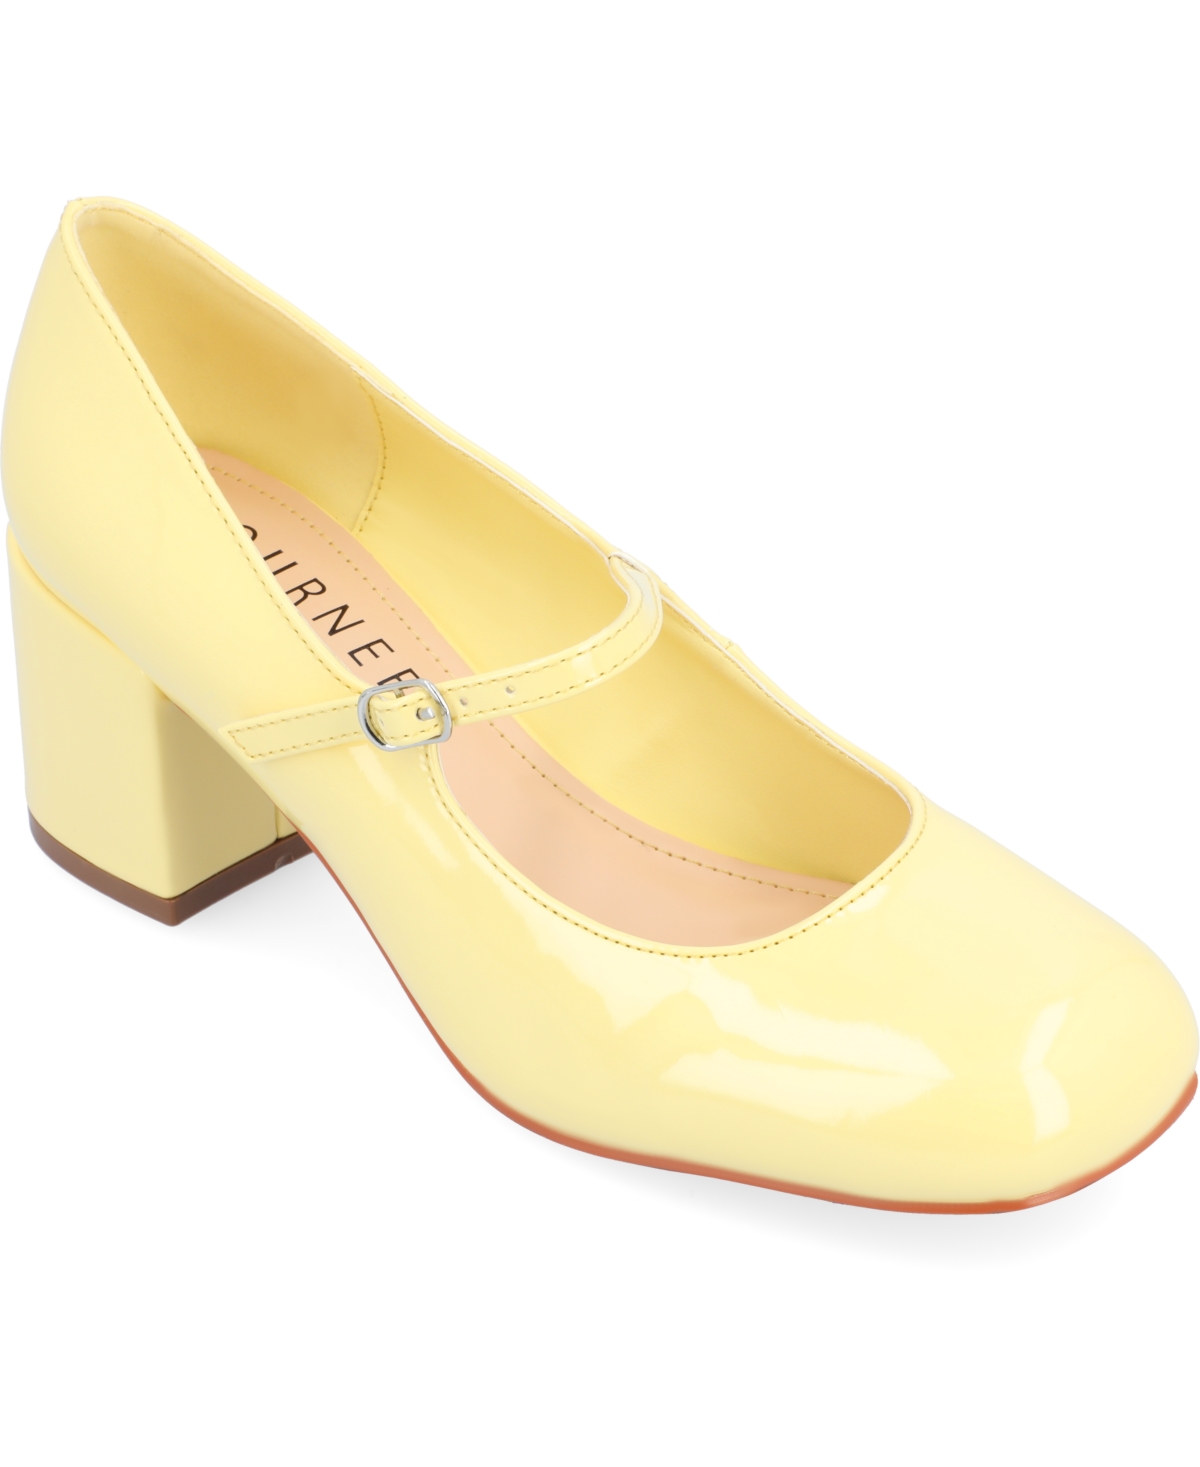 60s Shoes, Go Go Boots | 1960s Shoes, Flats, Heels, Boots Journee Collection Womens Okenna Heels - Yellow $74.99 AT vintagedancer.com